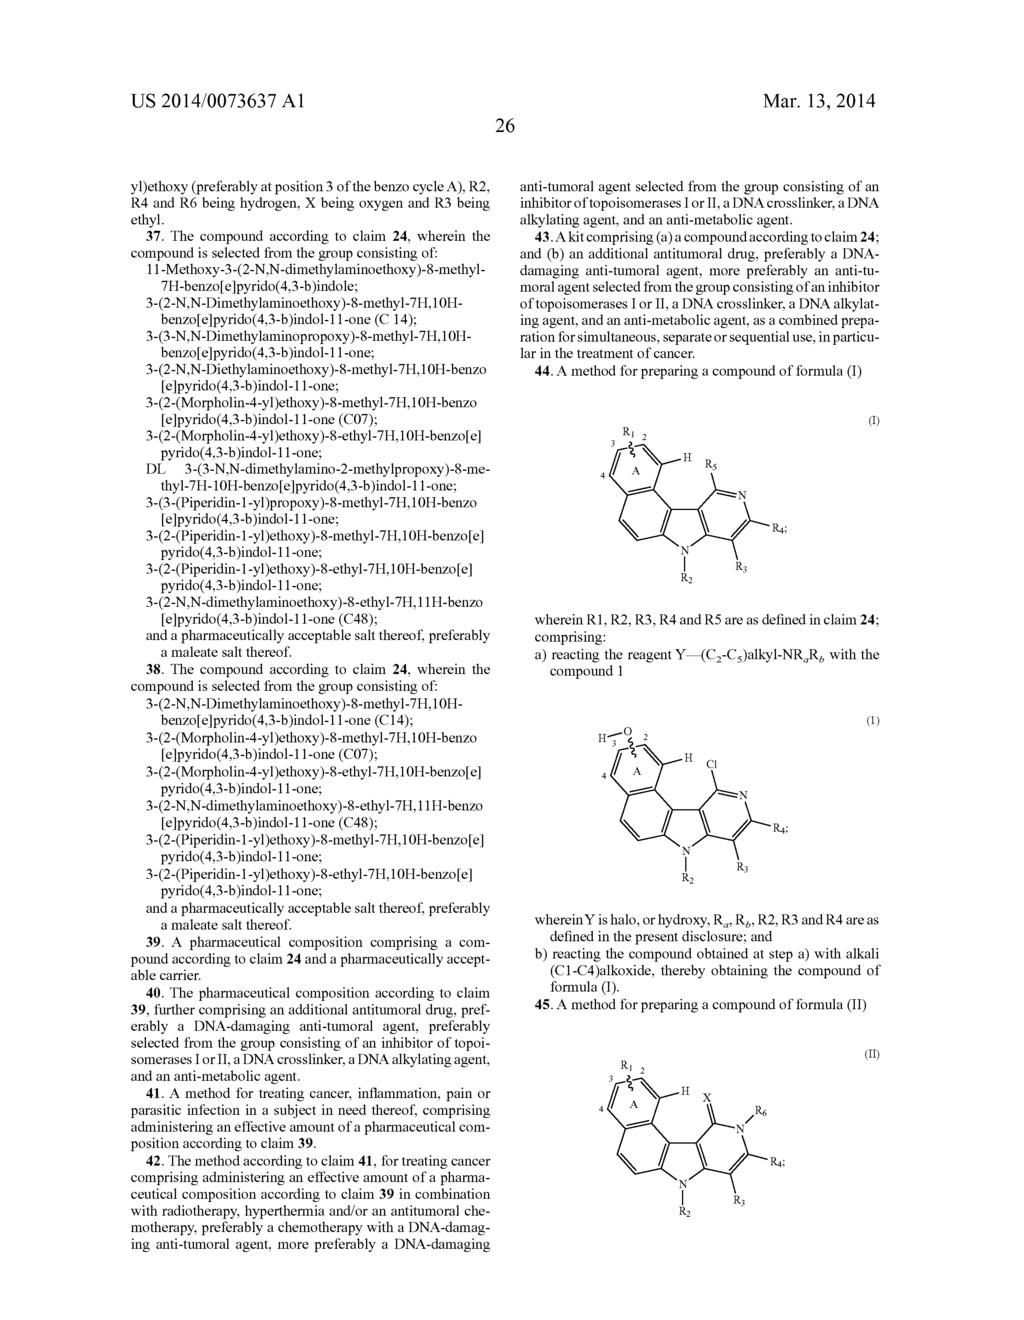 AMINO-SUBSTITUTED-ALKYLOXY-BENZO[E]PYRIDO[4,3-B]INDOLE DERIVATIVES AS NEW     POTENT KINASE INHIBITORS - diagram, schematic, and image 37